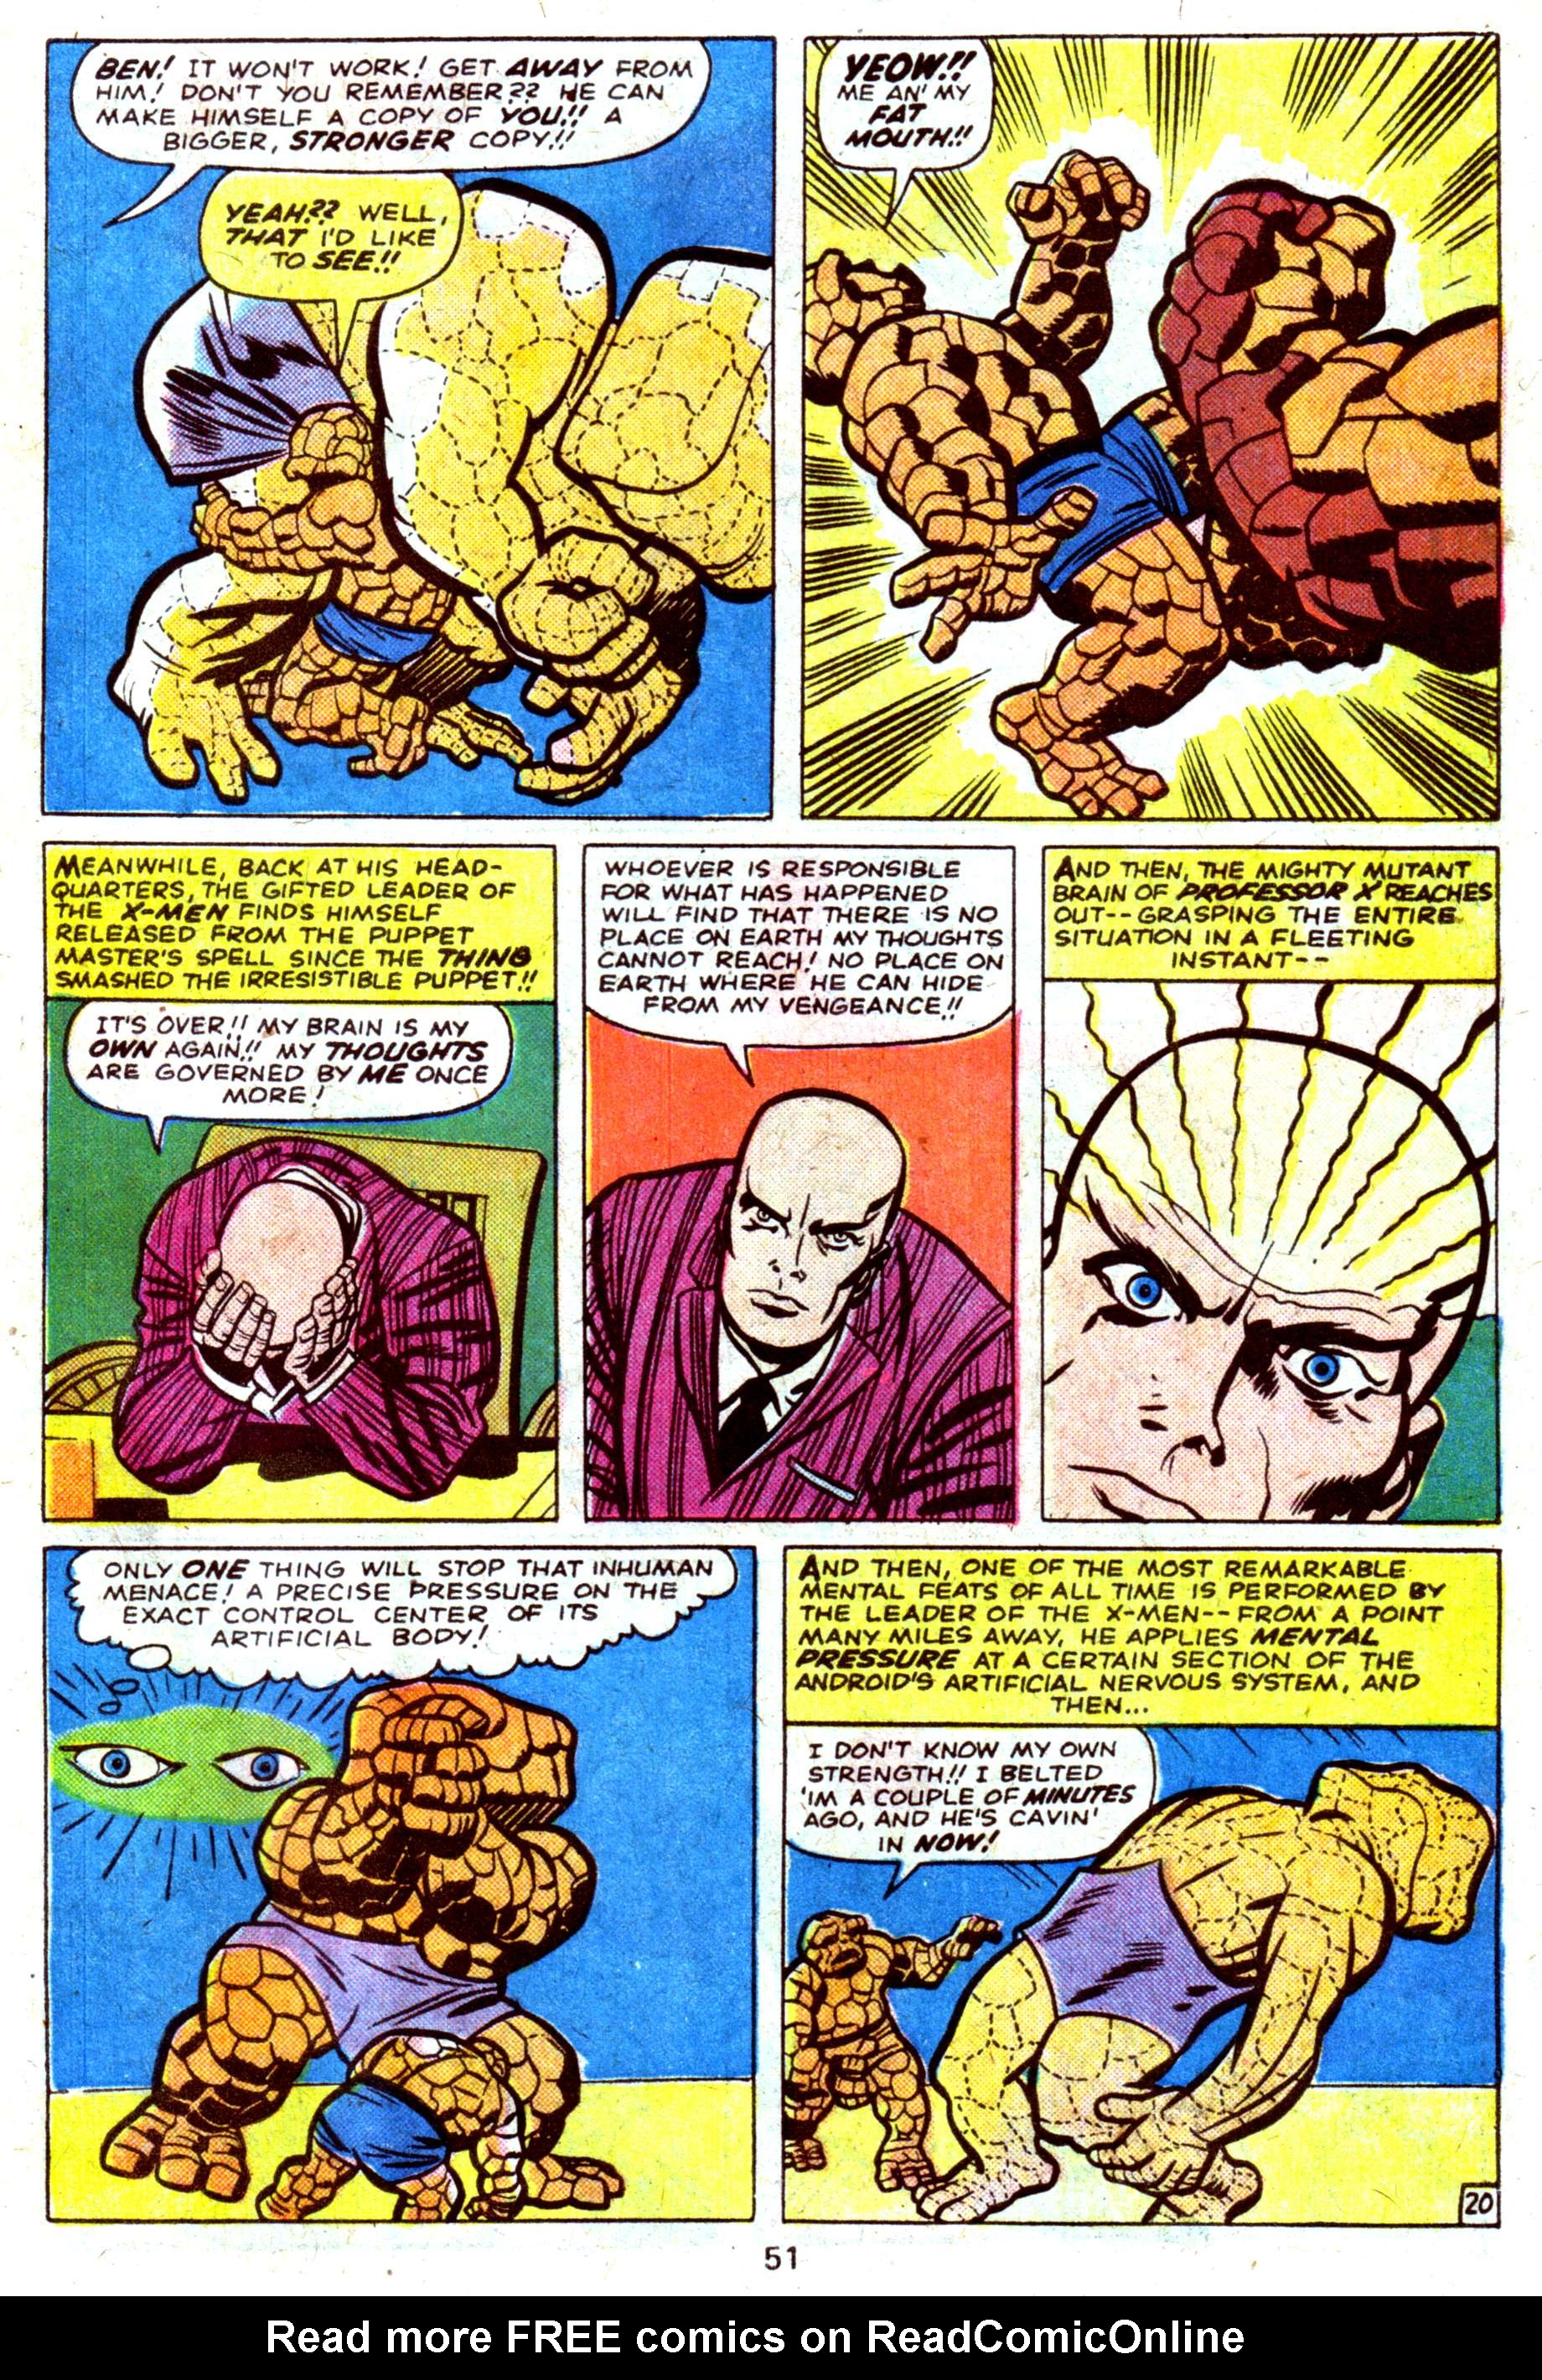 Read online Giant-Size Fantastic Four comic -  Issue #4 - 53